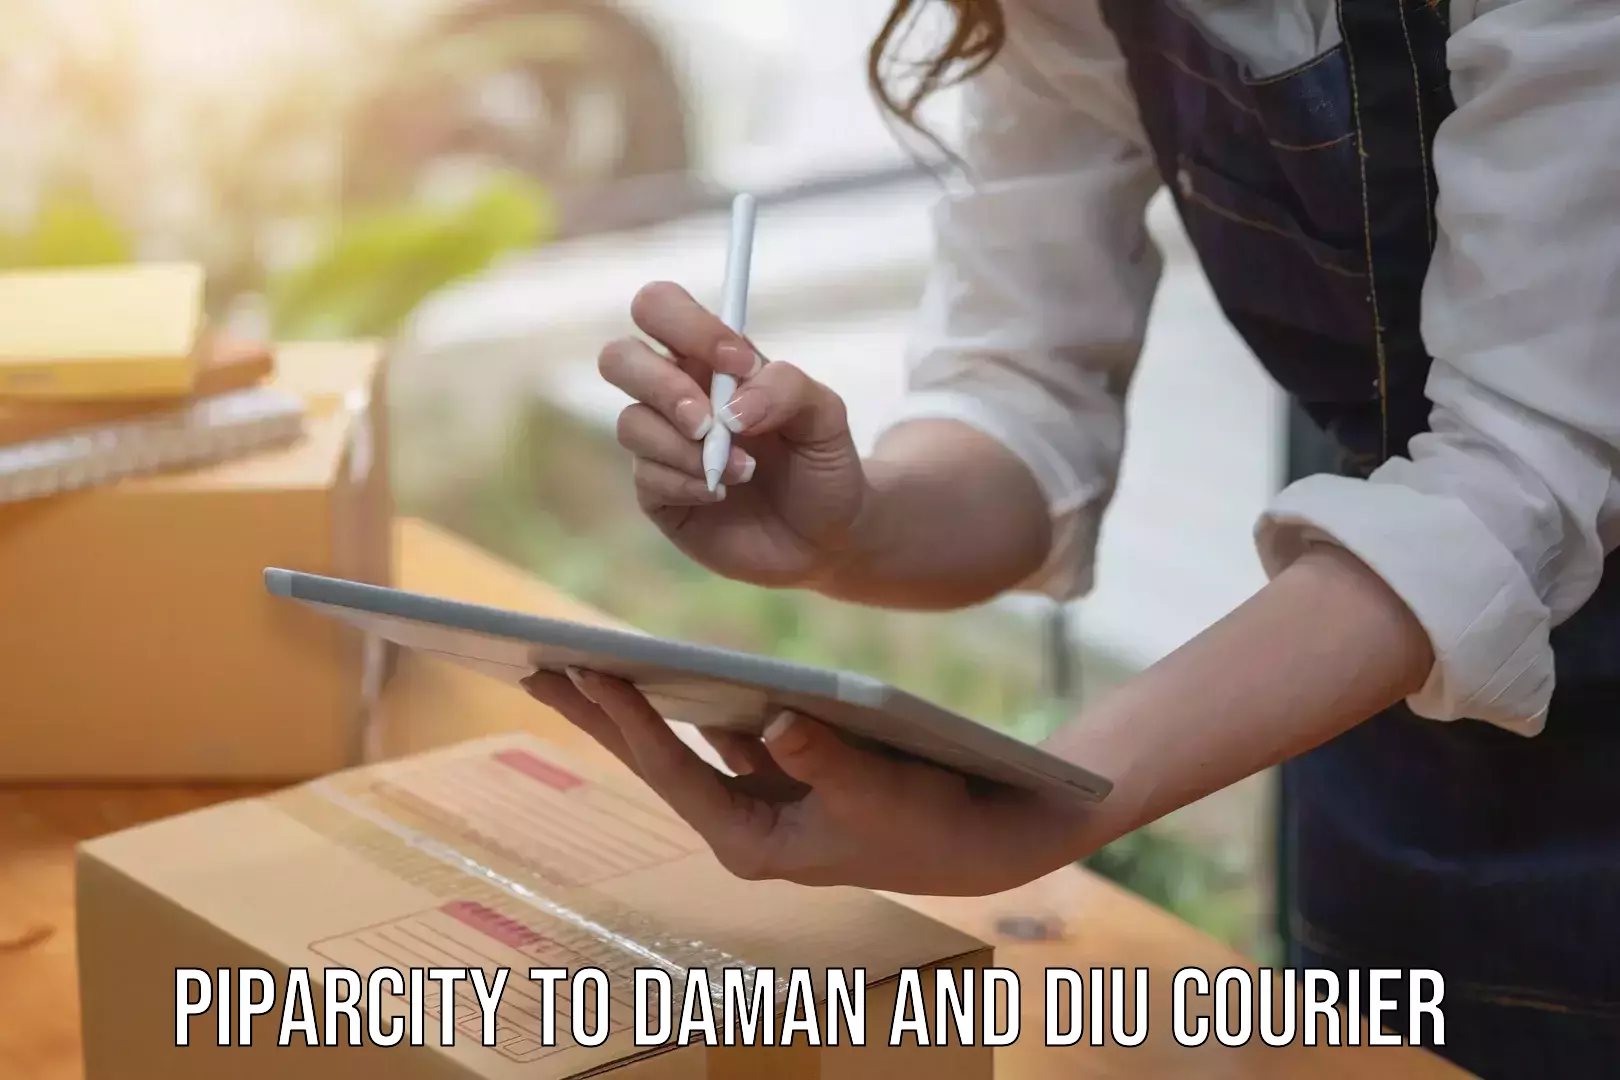 Online package tracking in Piparcity to Diu